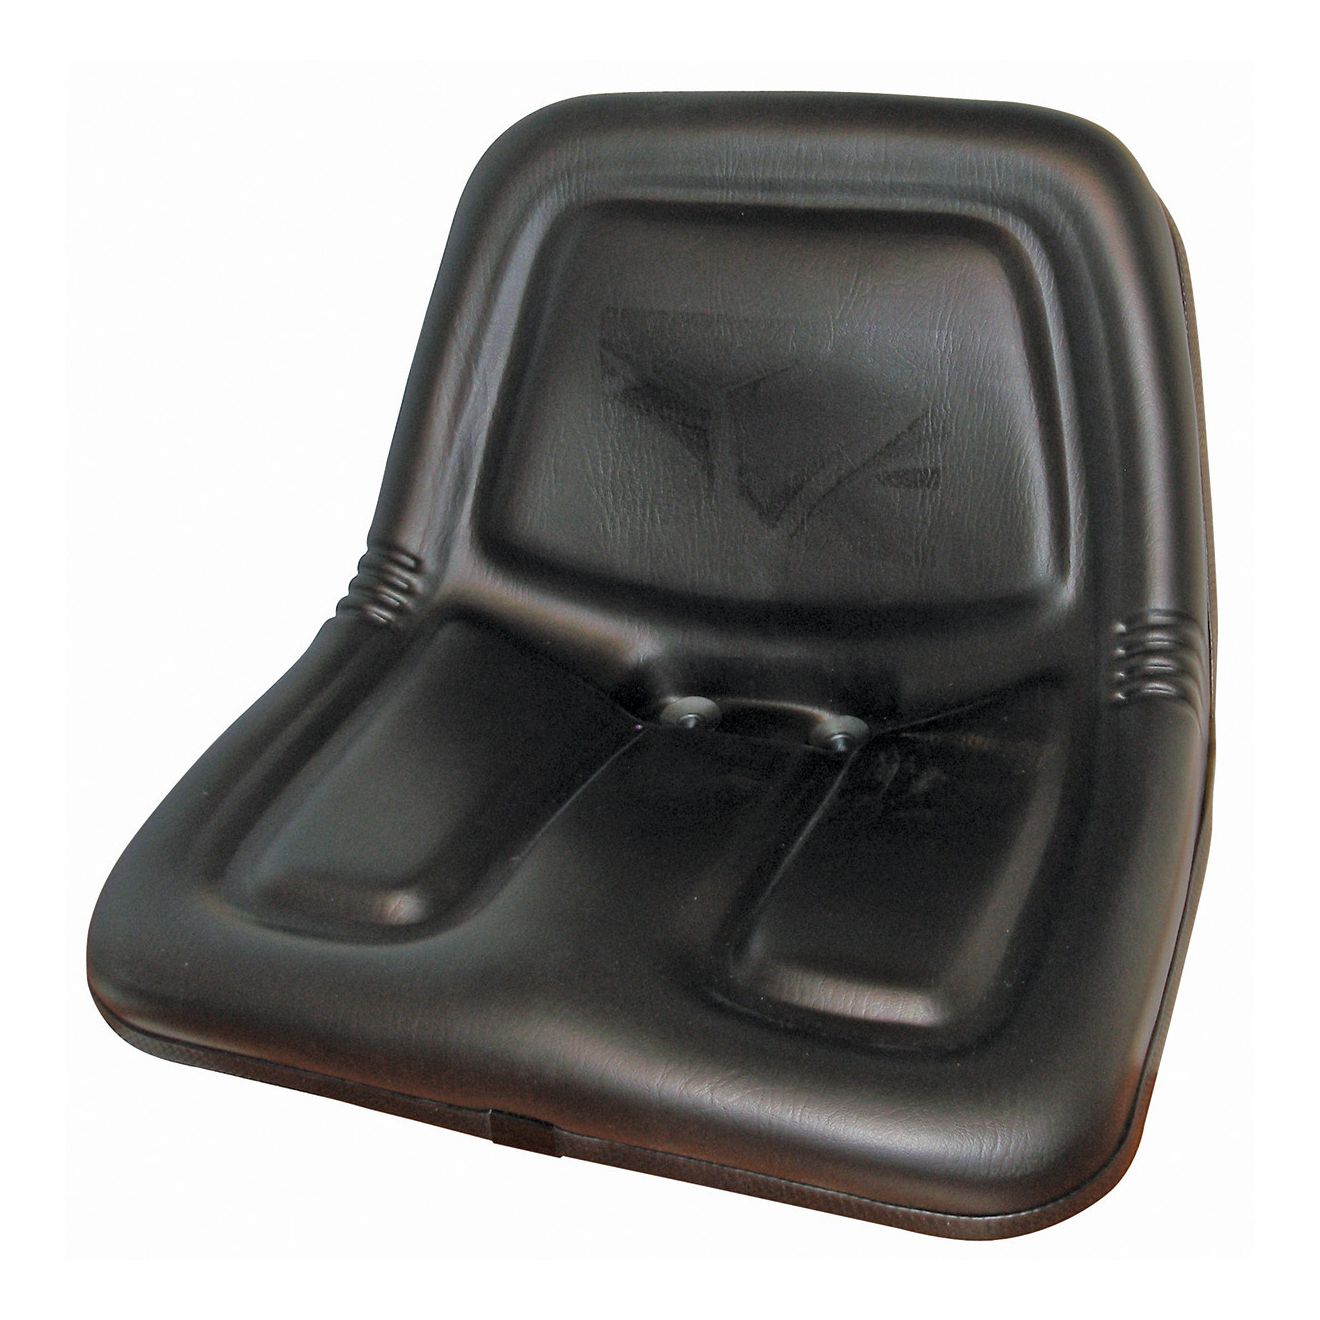 Universal Deluxe High Back Cushioned Ride-on Seat (Black) B1SE135